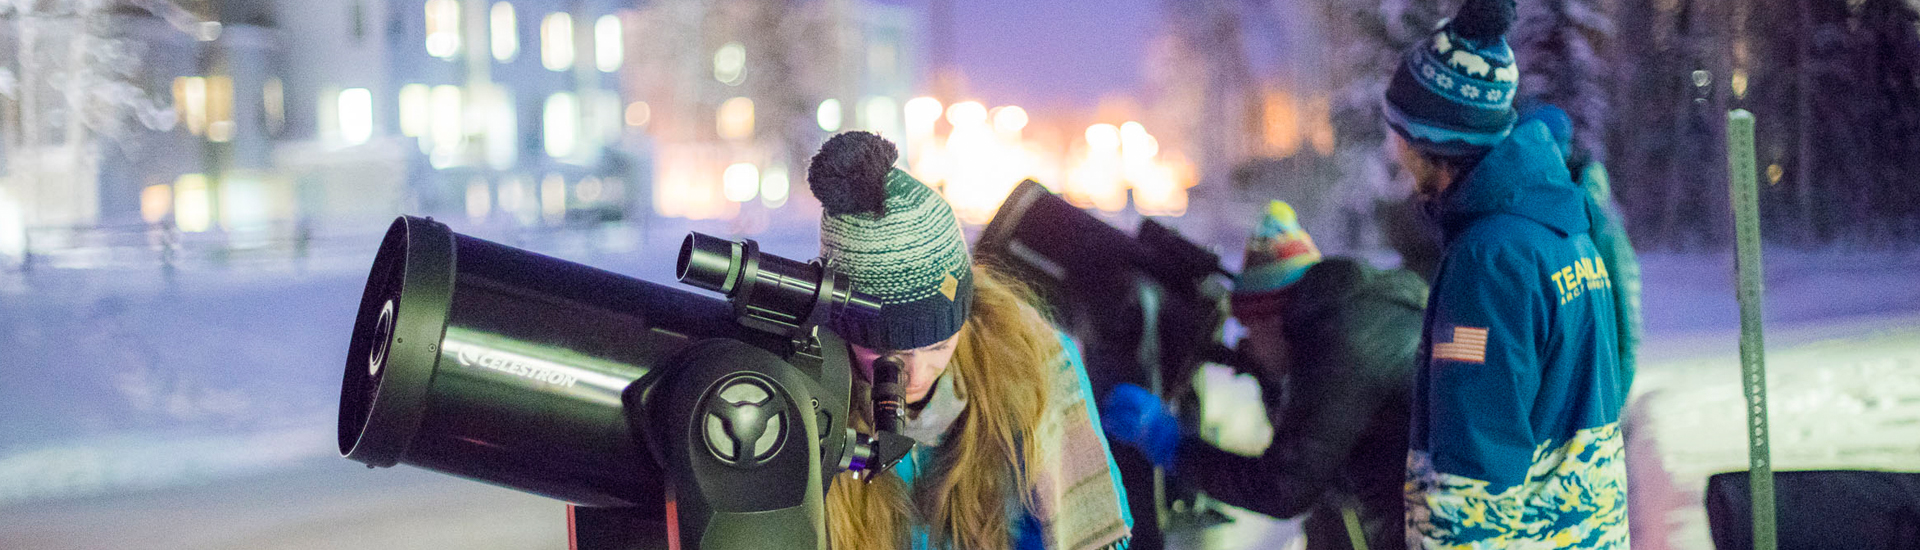 Students with telescopes